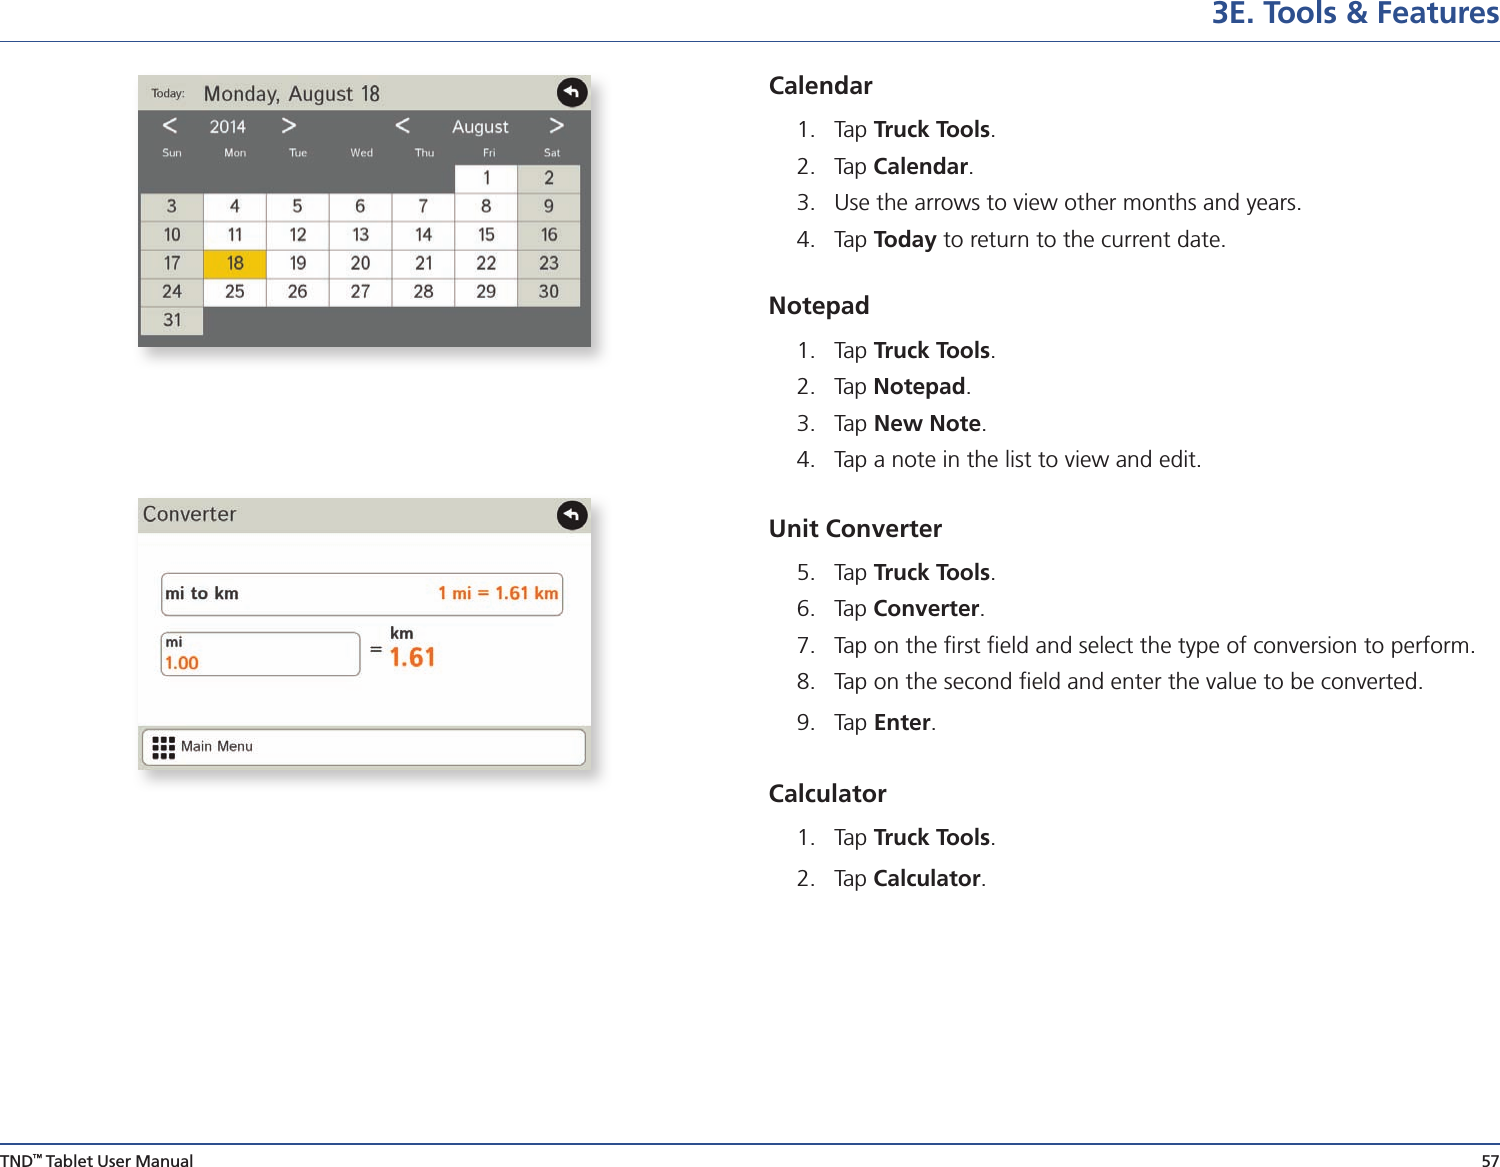 TND™ Tablet User Manual 573E. Tools &amp; FeaturesCalendar1.   Tap  Truck Tools.2.  Tap Calendar. 3.  Use the arrows to view other months and years.4.  Tap Today to return to the current date.Notepad1.   Tap  Truck Tools.2.  Tap Notepad. 3.  Tap New Note.4.  Tap a note in the list to view and edit. Unit Converter 5.   Tap  Truck Tools.6.  Tap Converter. 7.   Tap on the ﬁrst ﬁeld and select the type of conversion to perform.8.   Tap on the second ﬁeld and enter the value to be converted.9.   Tap  Enter.  Calculator1.   Tap  Truck Tools.2.  Tap Calculator. 